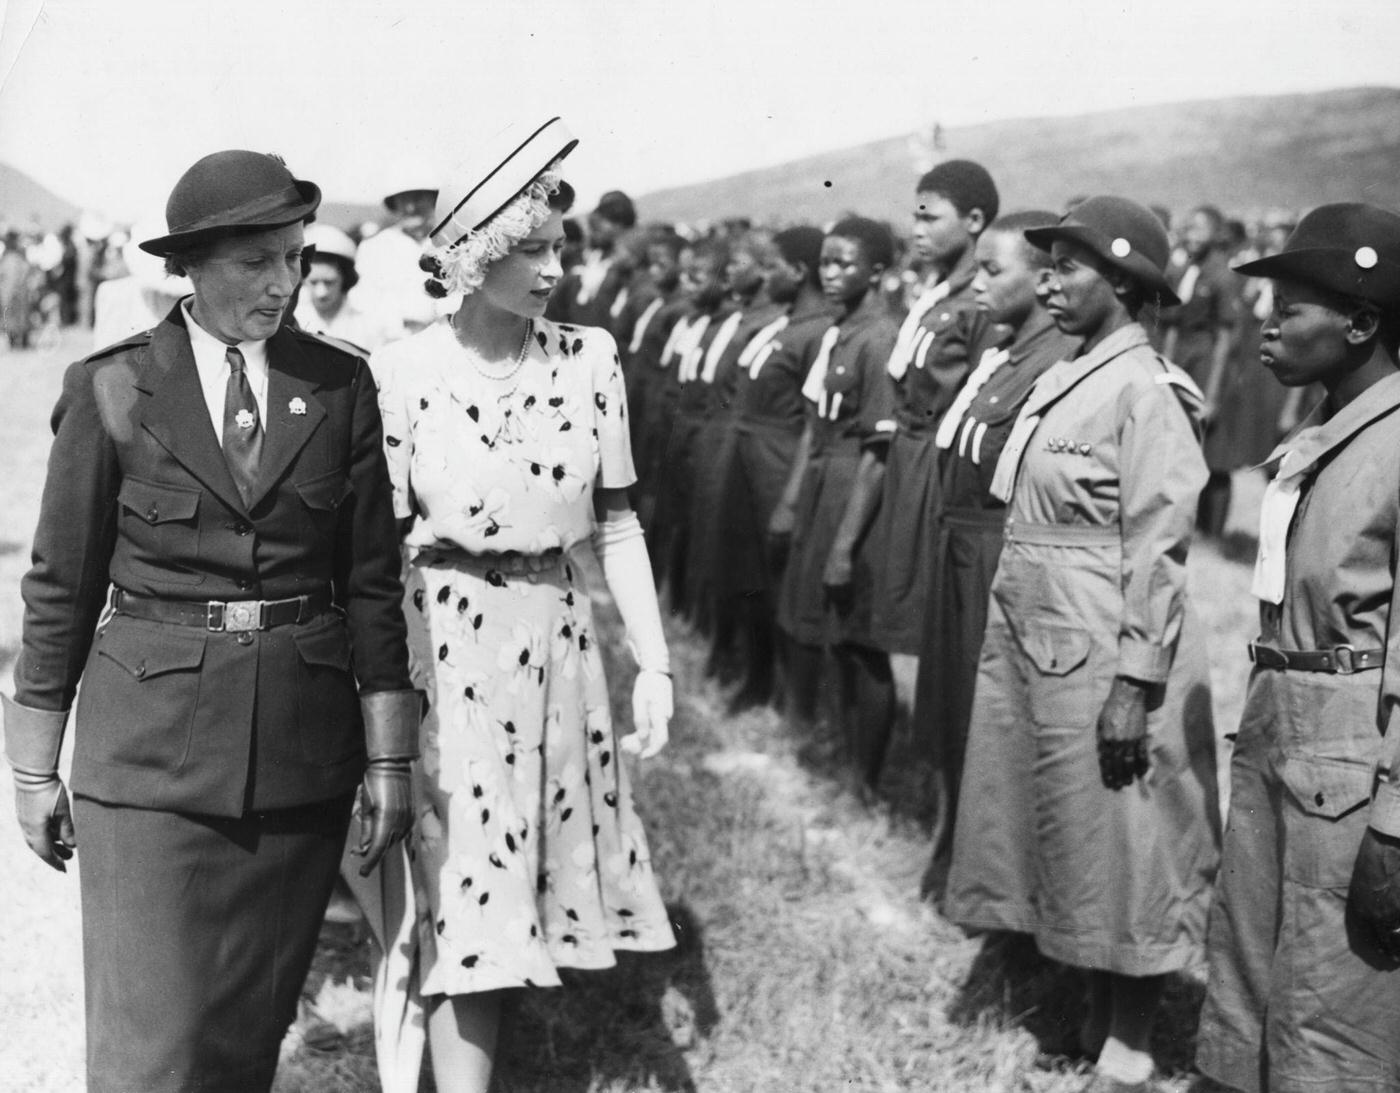 Princess Elizabeth inspects a line of Rhodesian girl guides at Lobatse, Bechuanaland Protectorate, 21 April 1947.